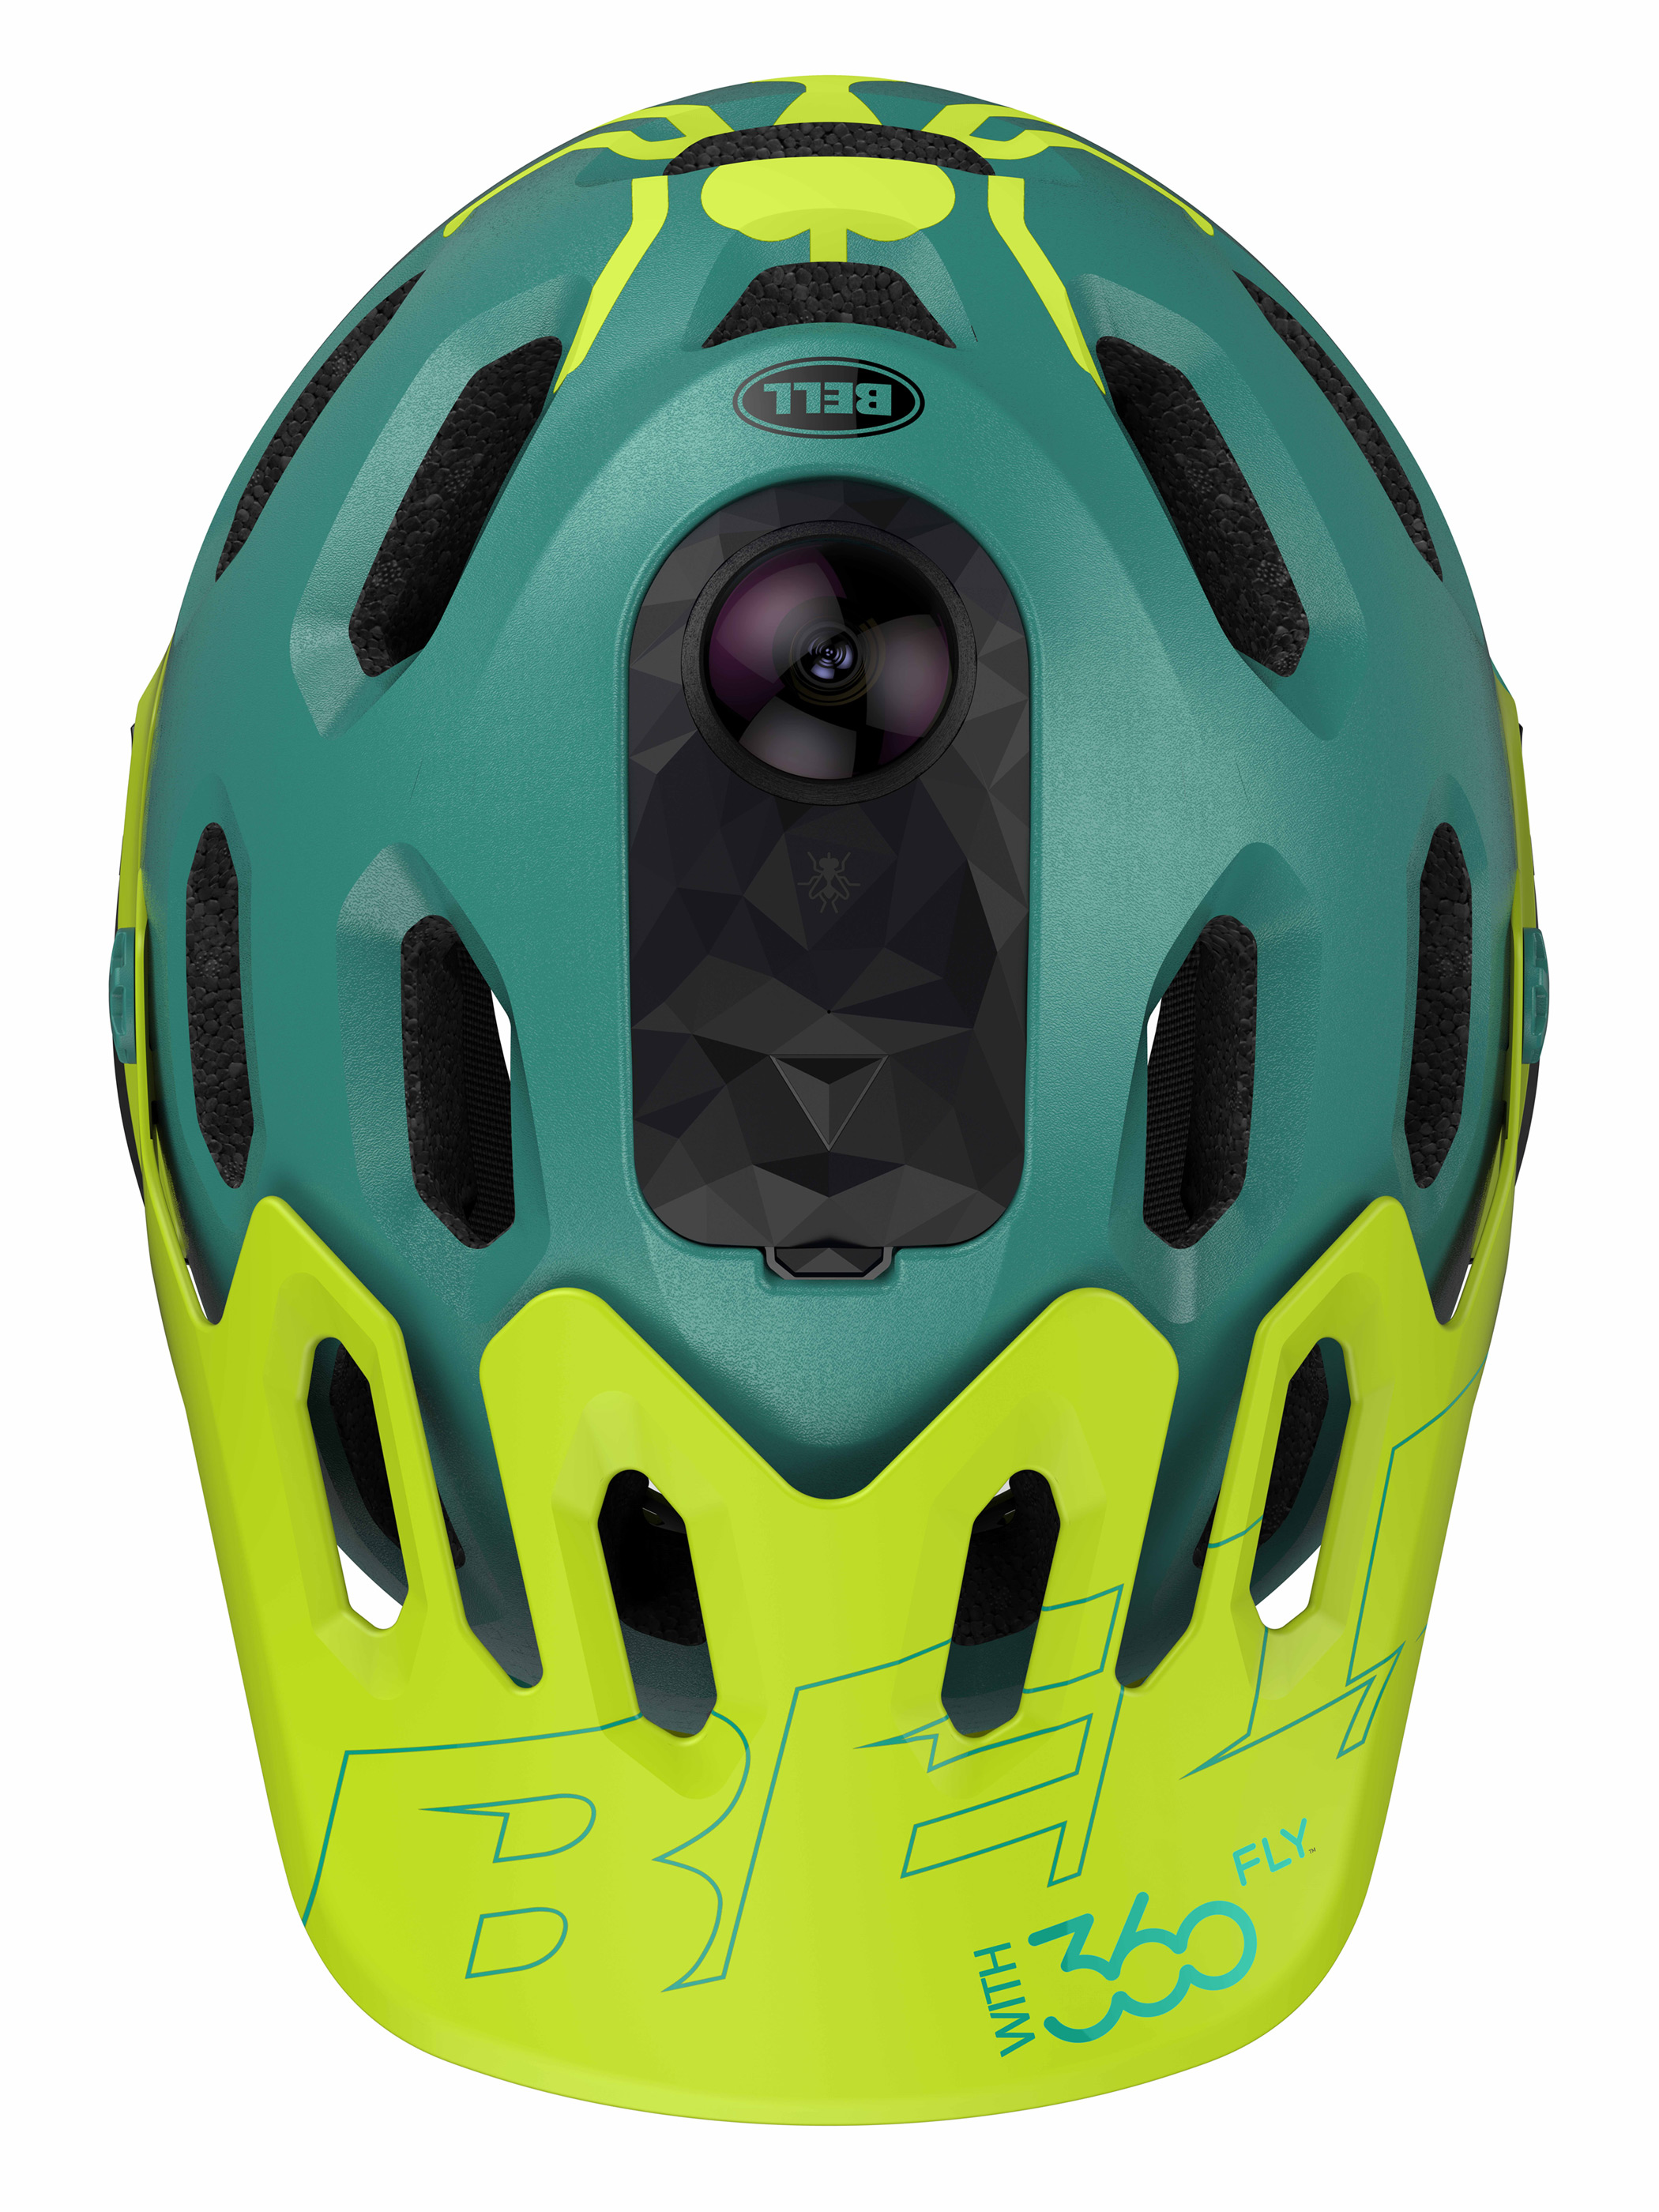 Bell integrated 360fly gets the wide view with fully panoramic helmet camera